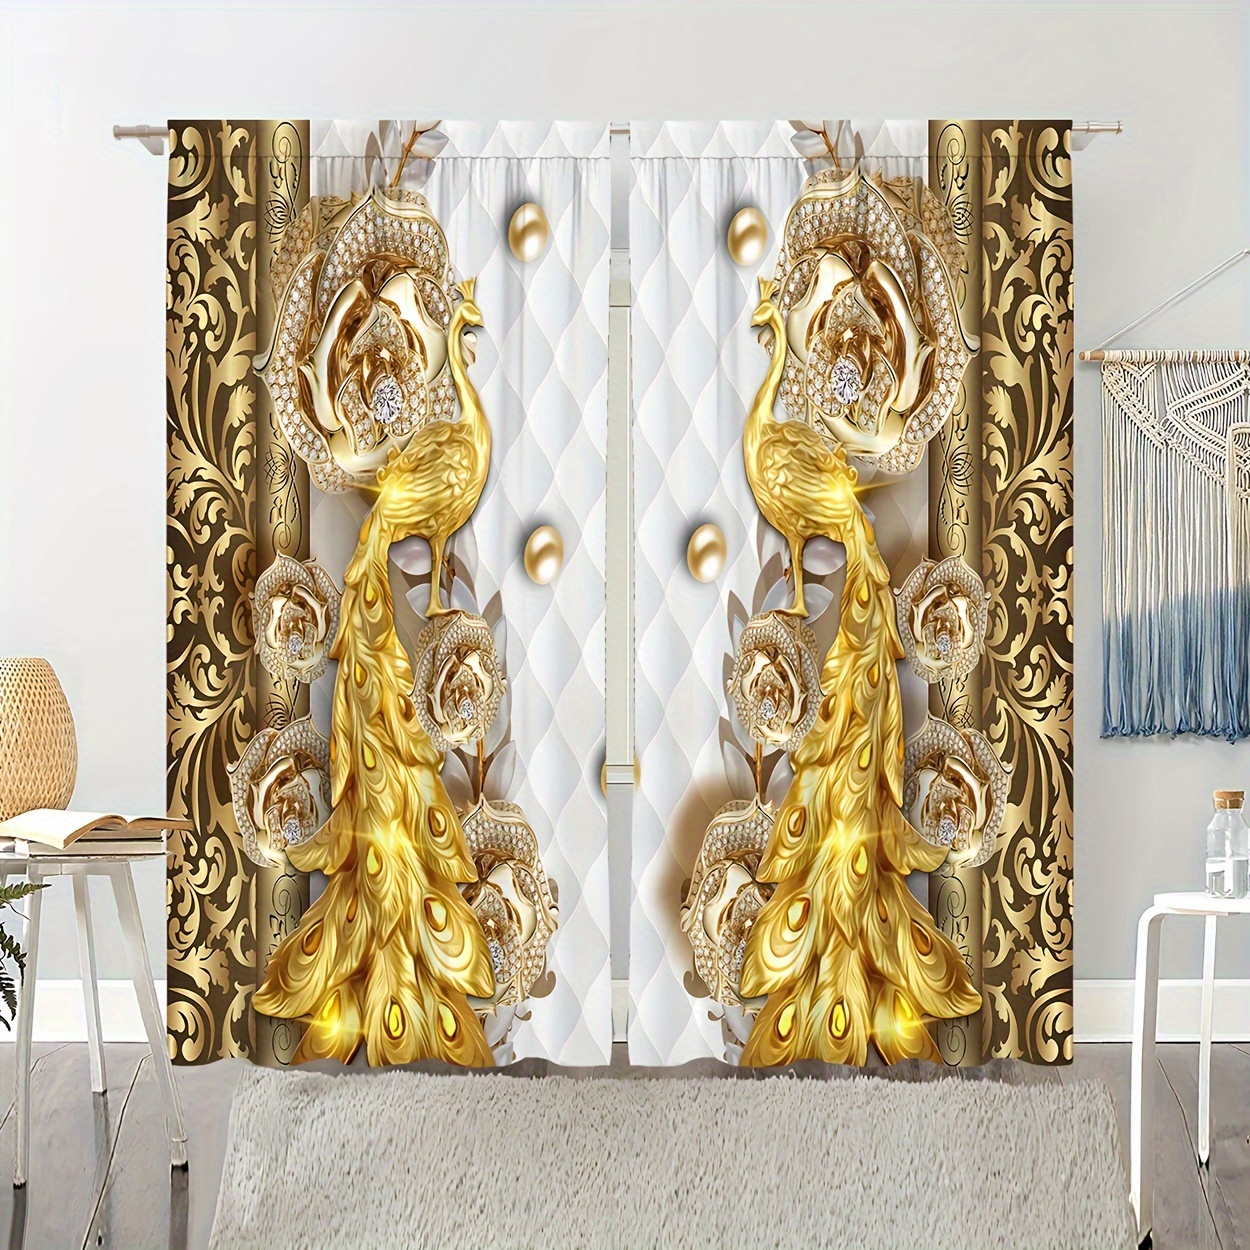 

2-piece Set Golden Peacock Print Curtains - Rod Pocket Design For Easy Hanging, Fade-resistant Polyester Drapes For Living Room, Bedroom, Kitchen & Home Decor